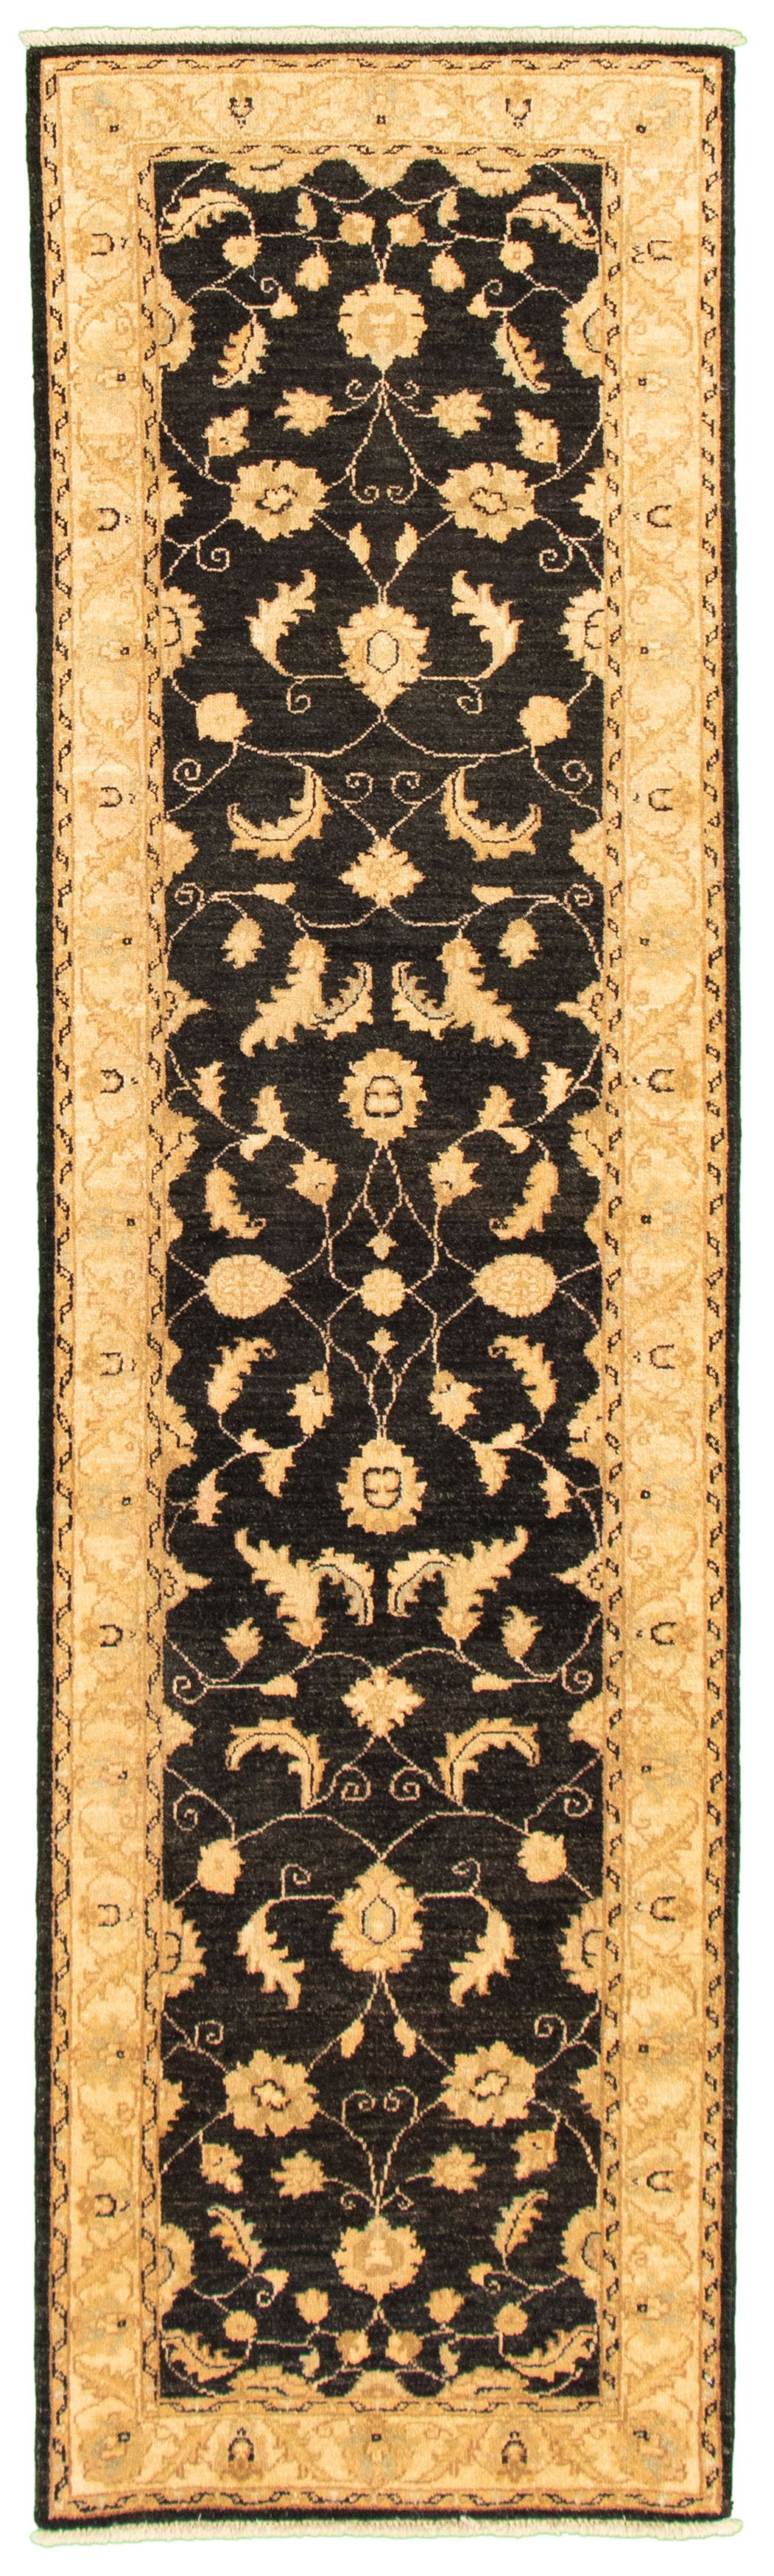 Hand-knotted Chobi Finest Black Wool Rug 2'7" x 9'9" Size: 2'7" x 9'9"  